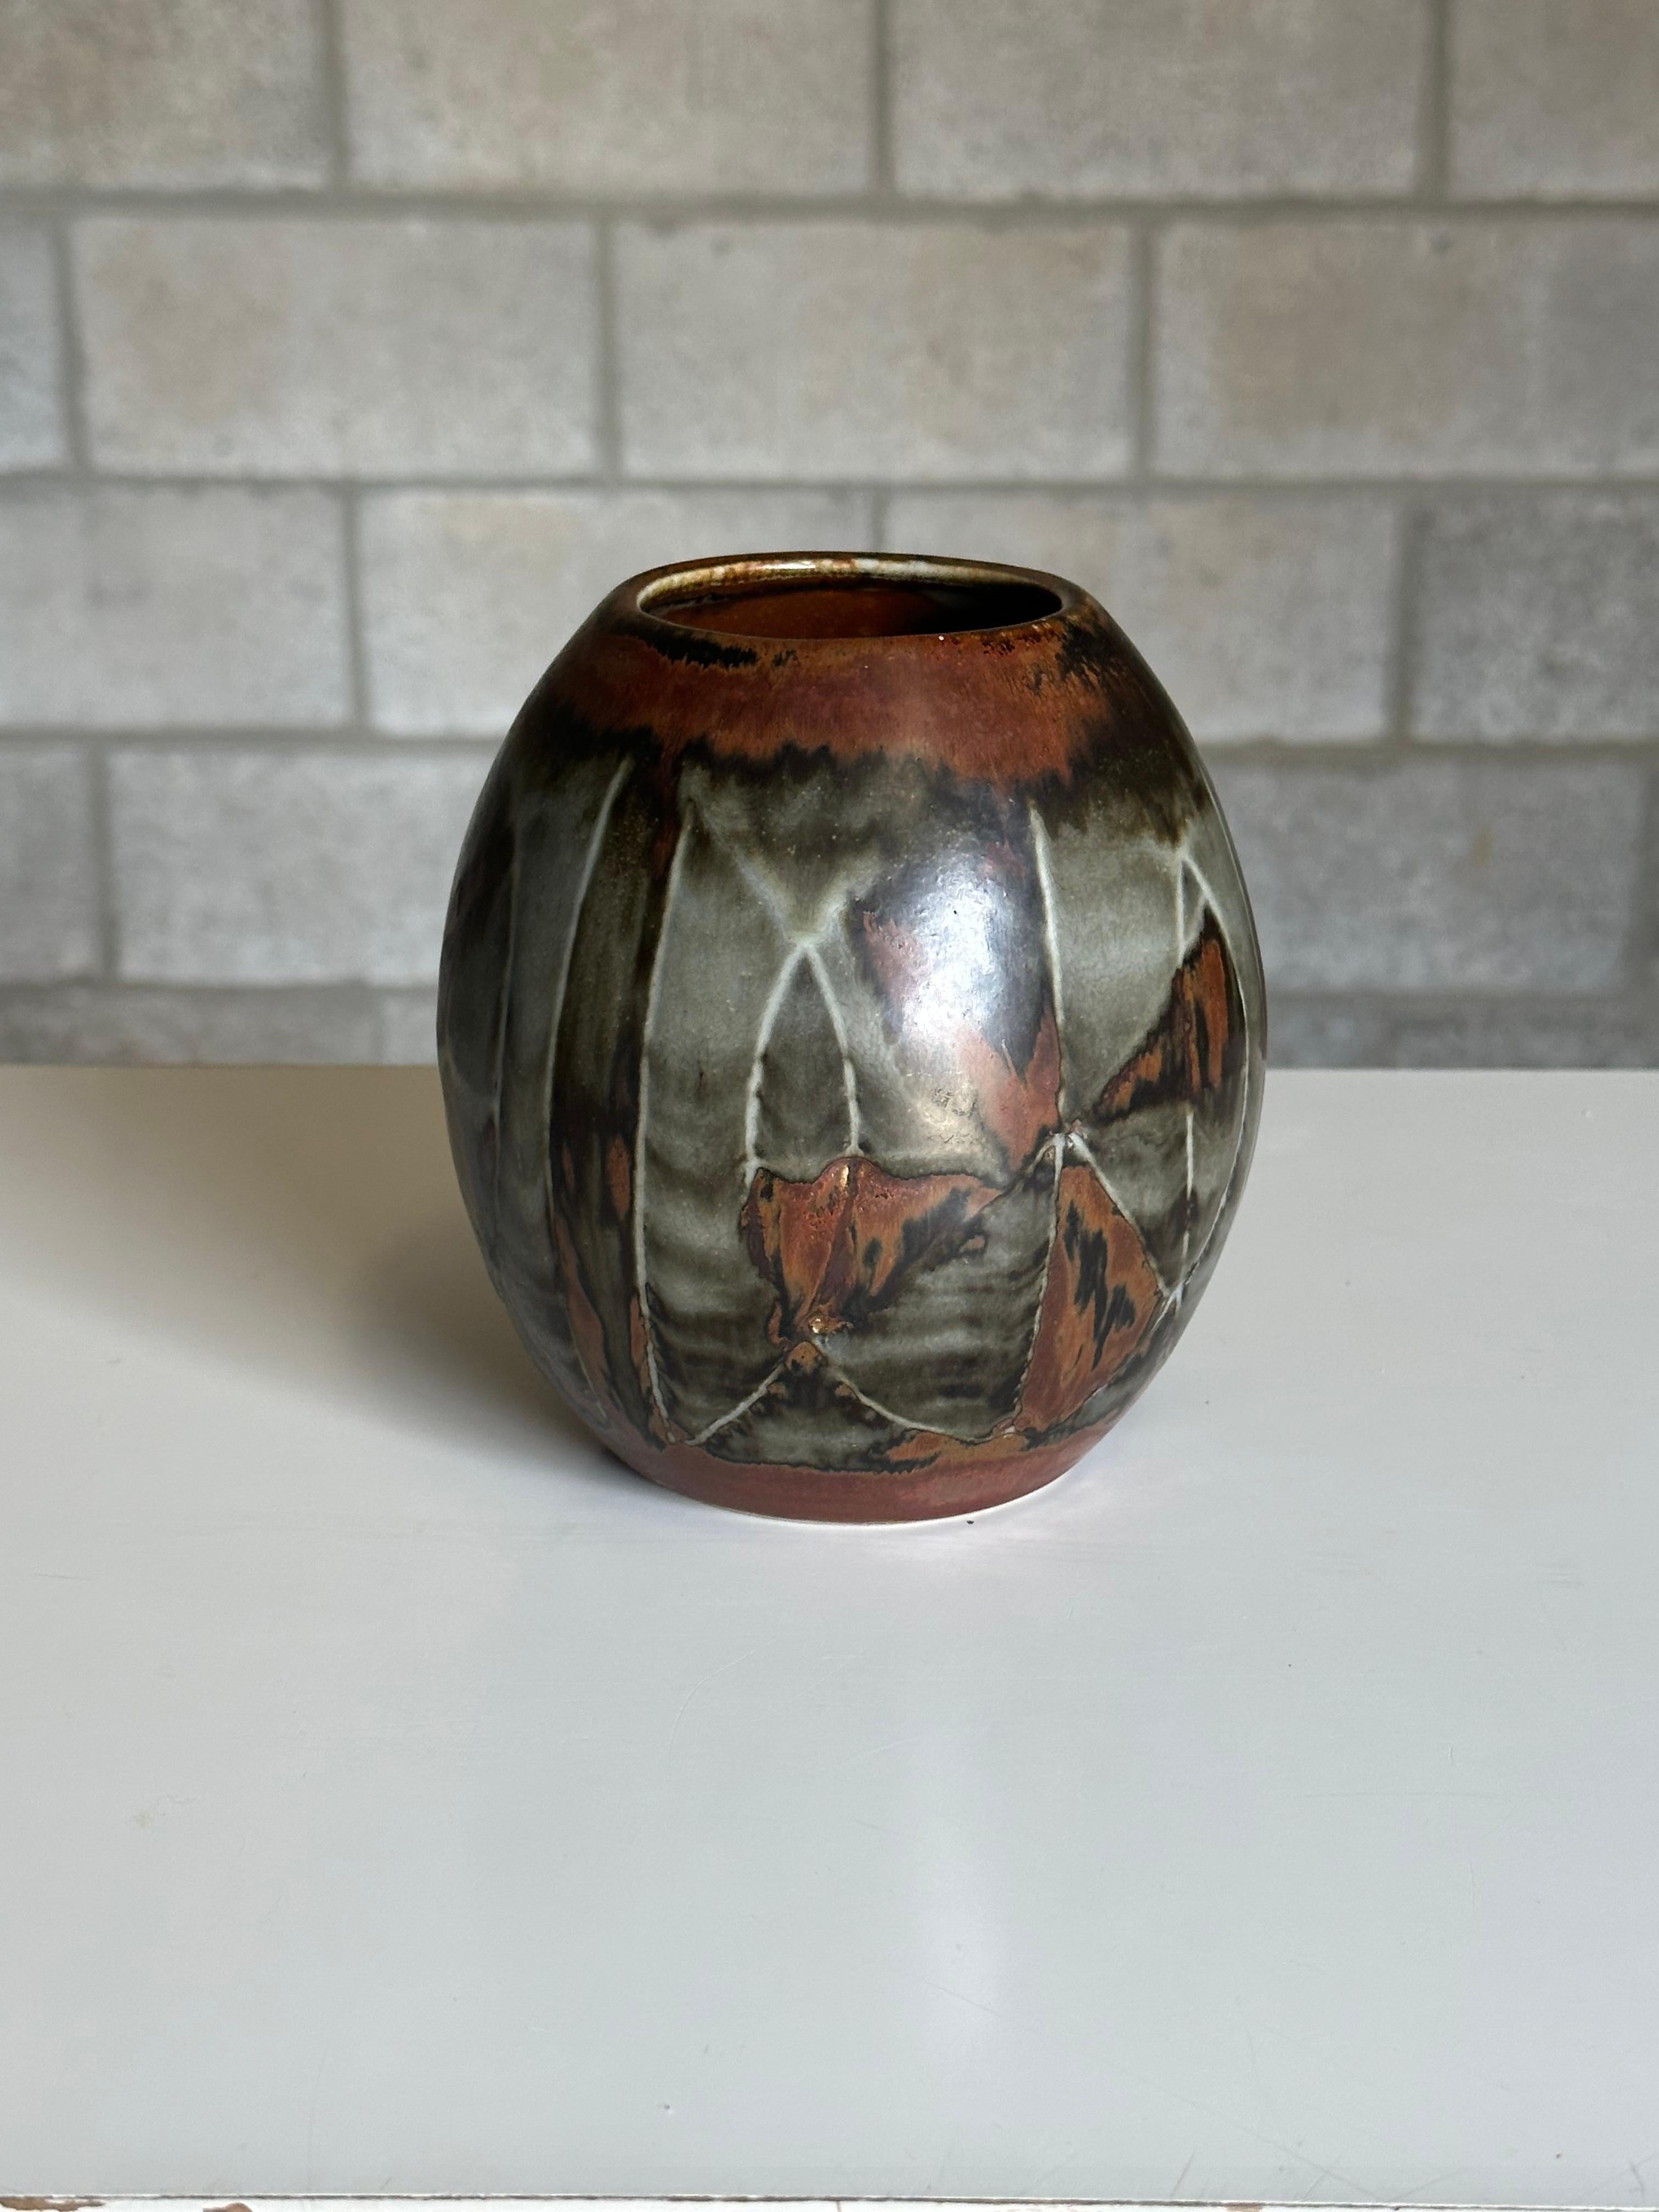 Large Stoneware Vase by Carl-Harry Stålhane for Rörstrand. Interesting decoration adds this piece. Wonderful depth of colors in glaze.